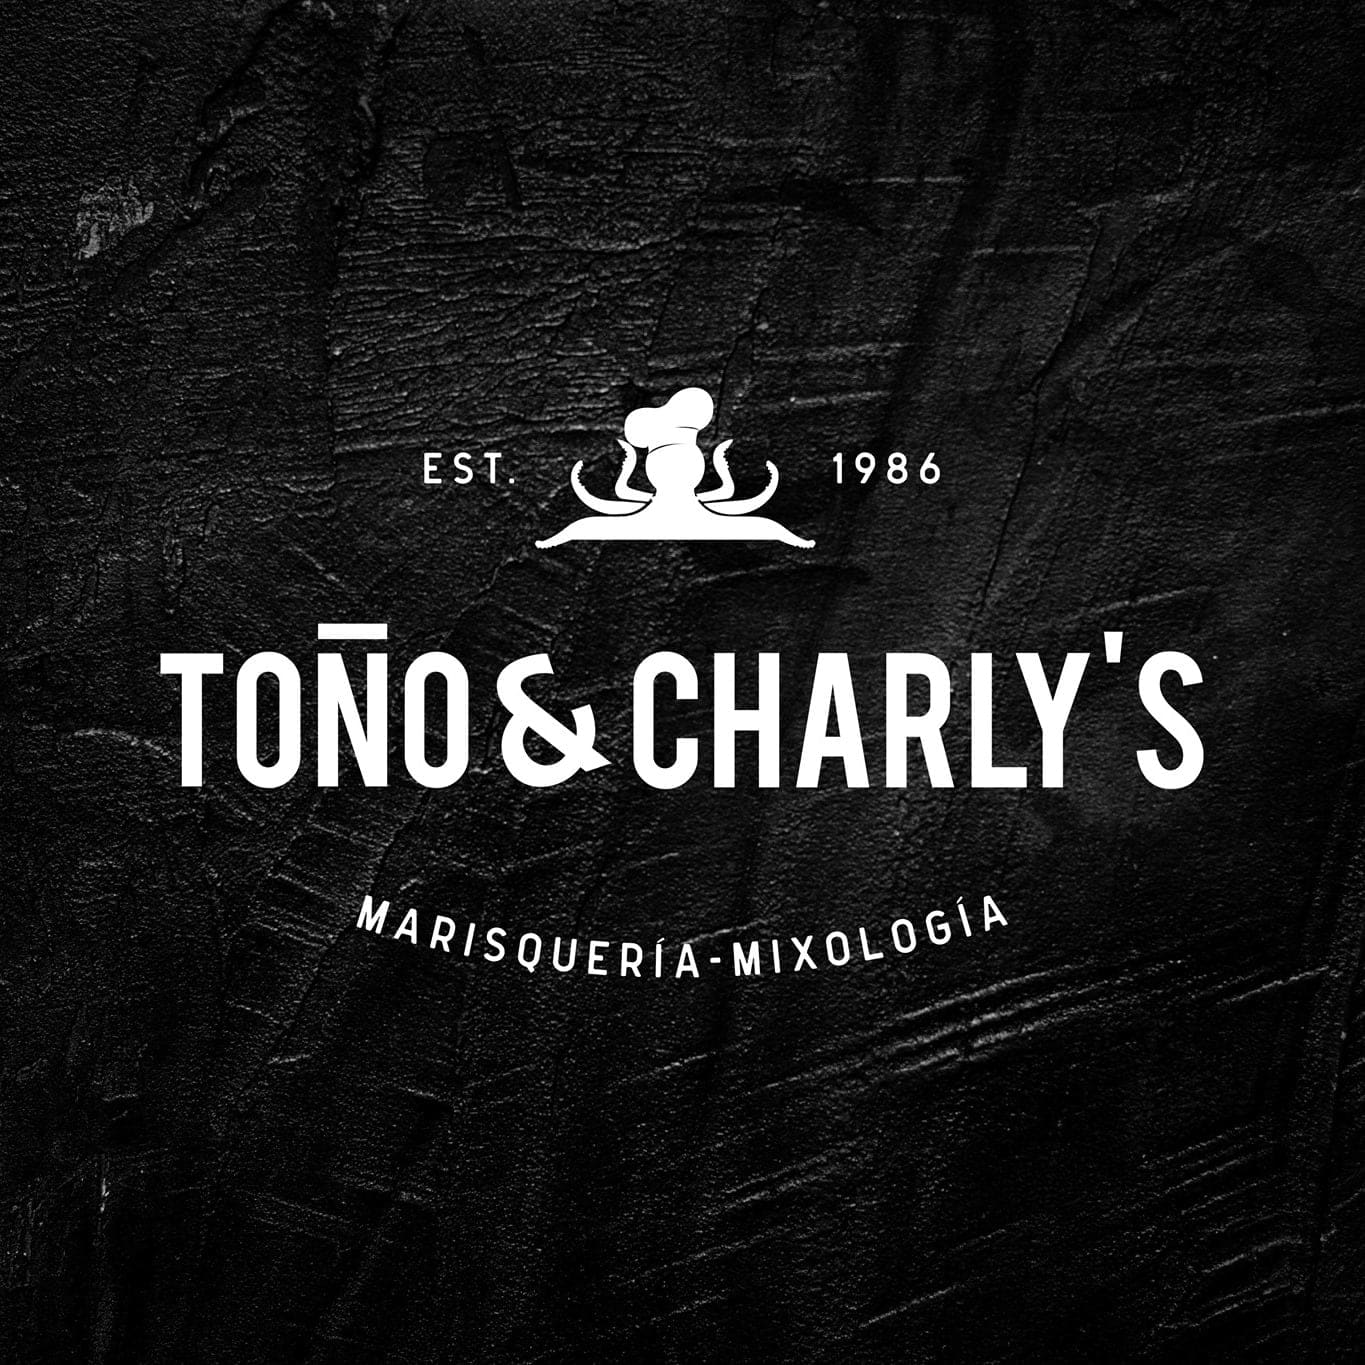 Toño y Charly's